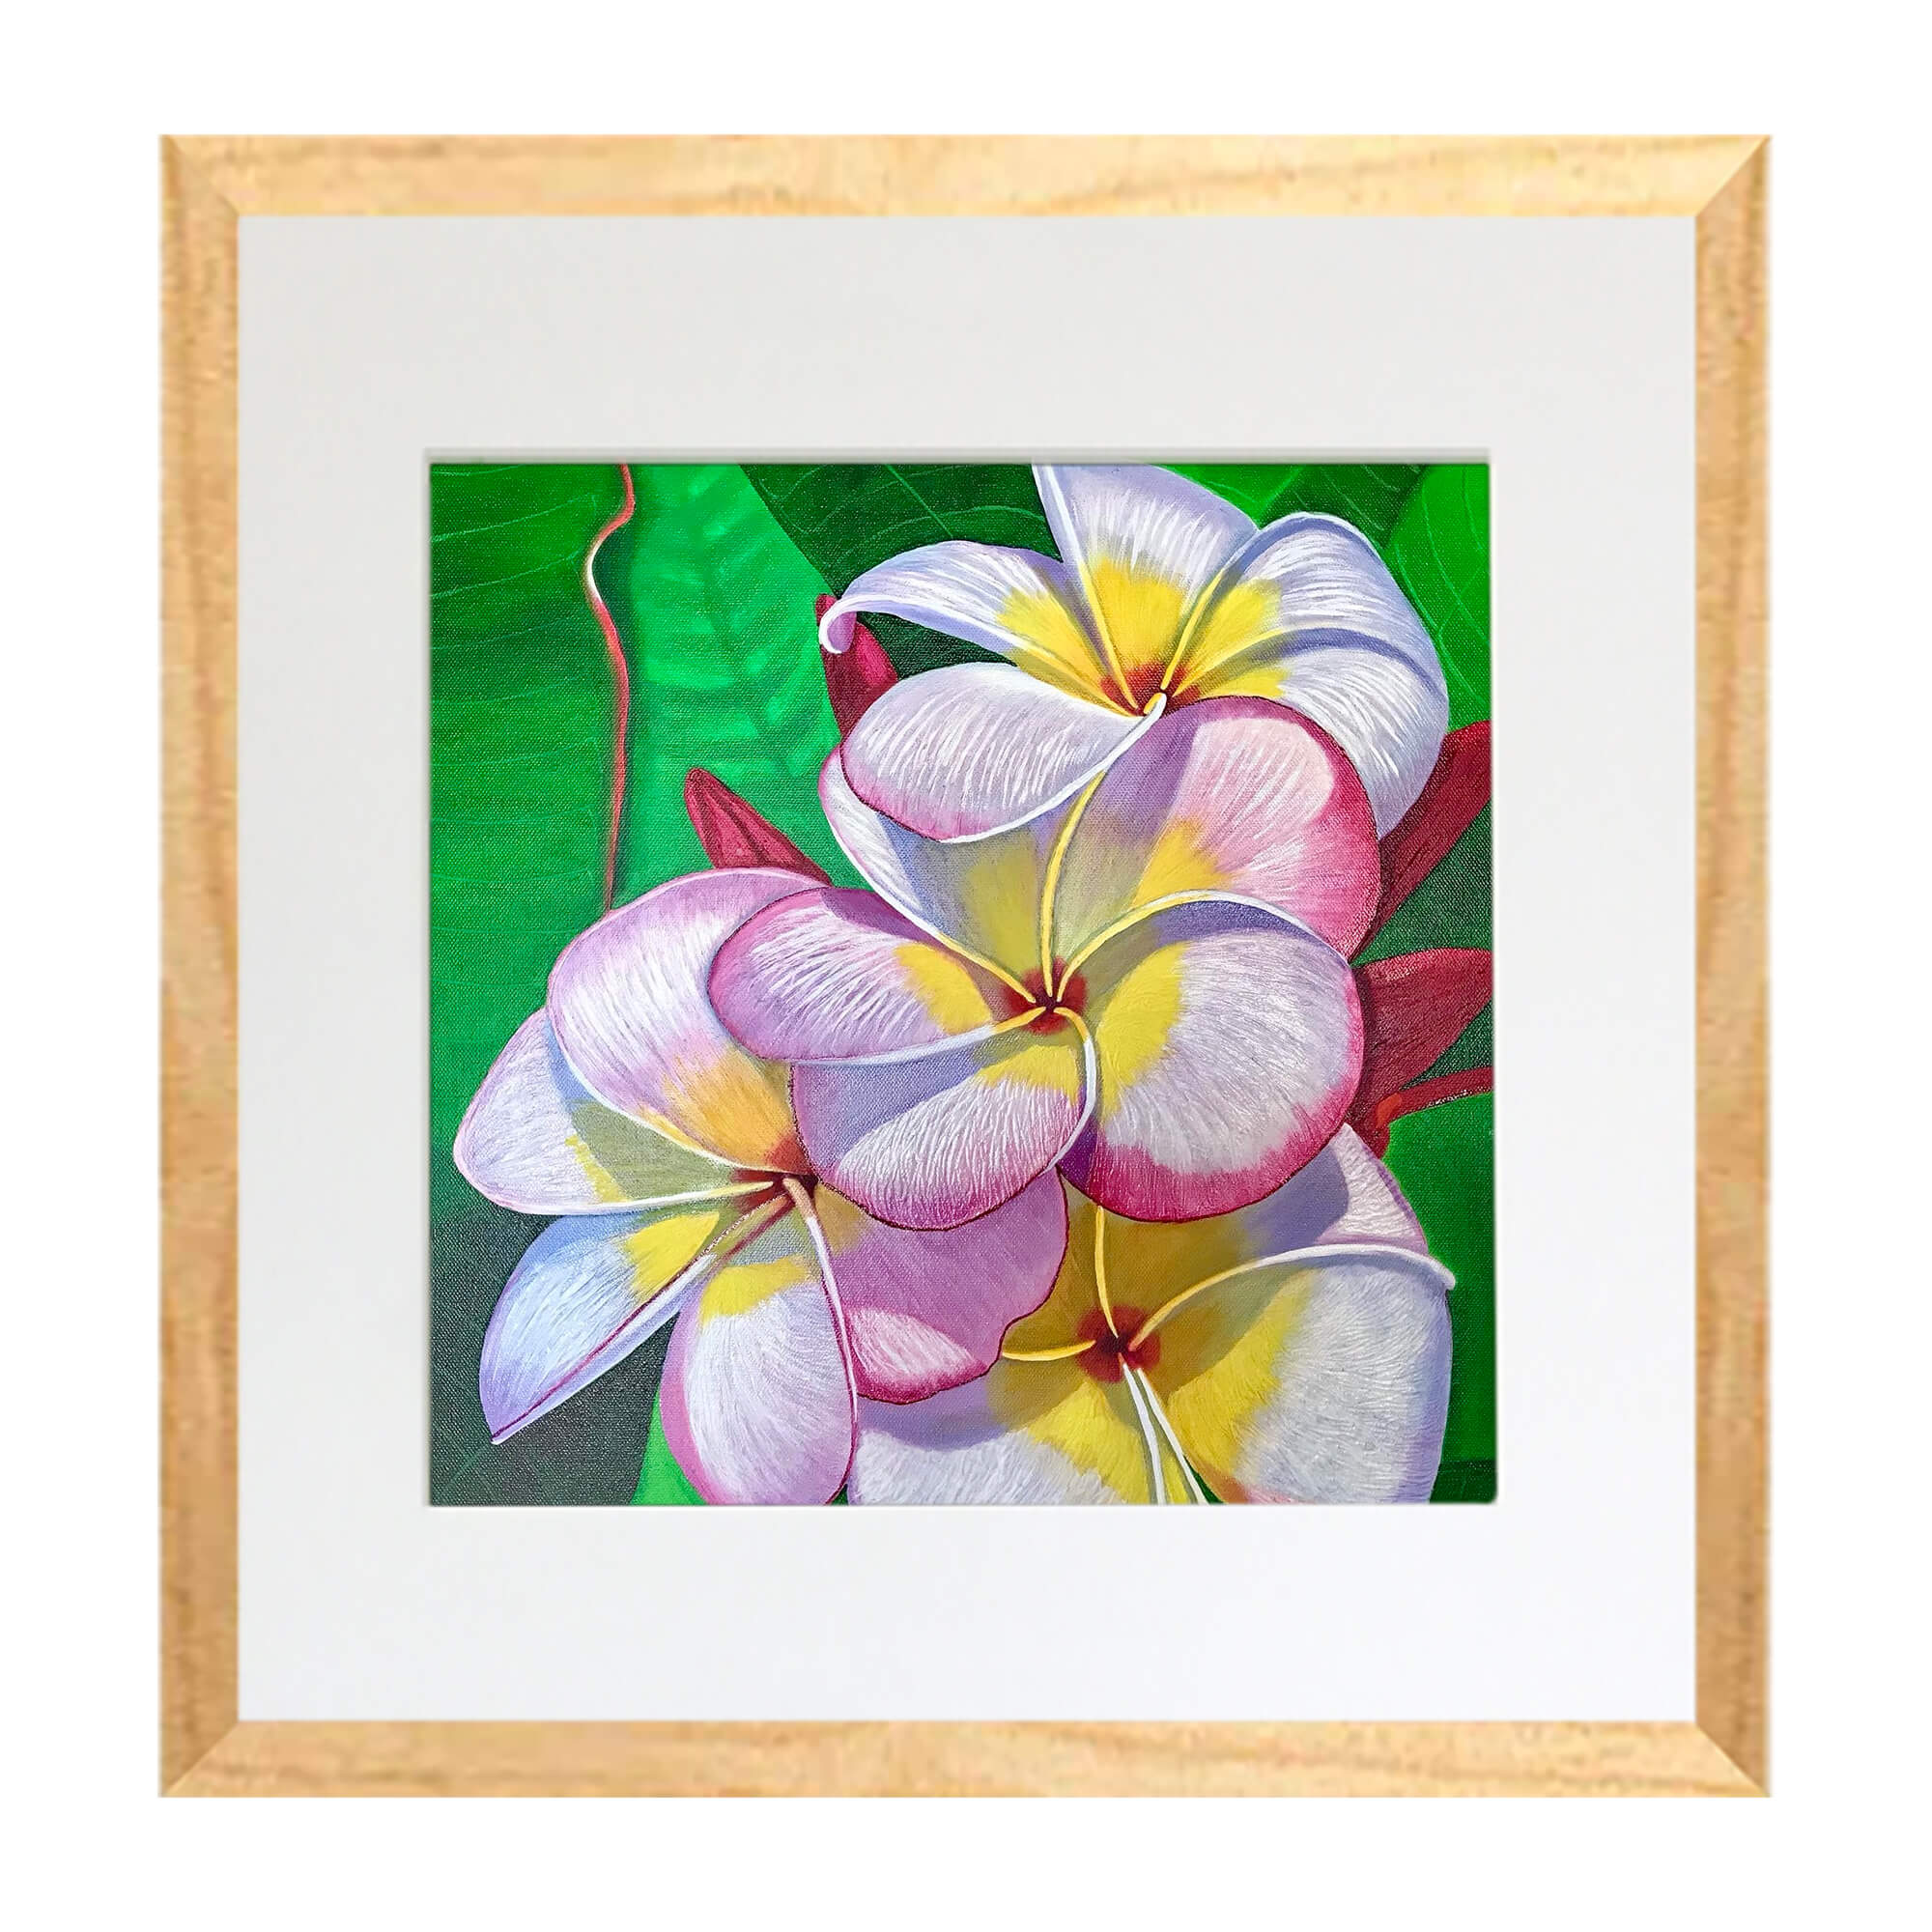 Matted art print with wood frame featuring a blooming flower  by hawaii artist Galina Lintz